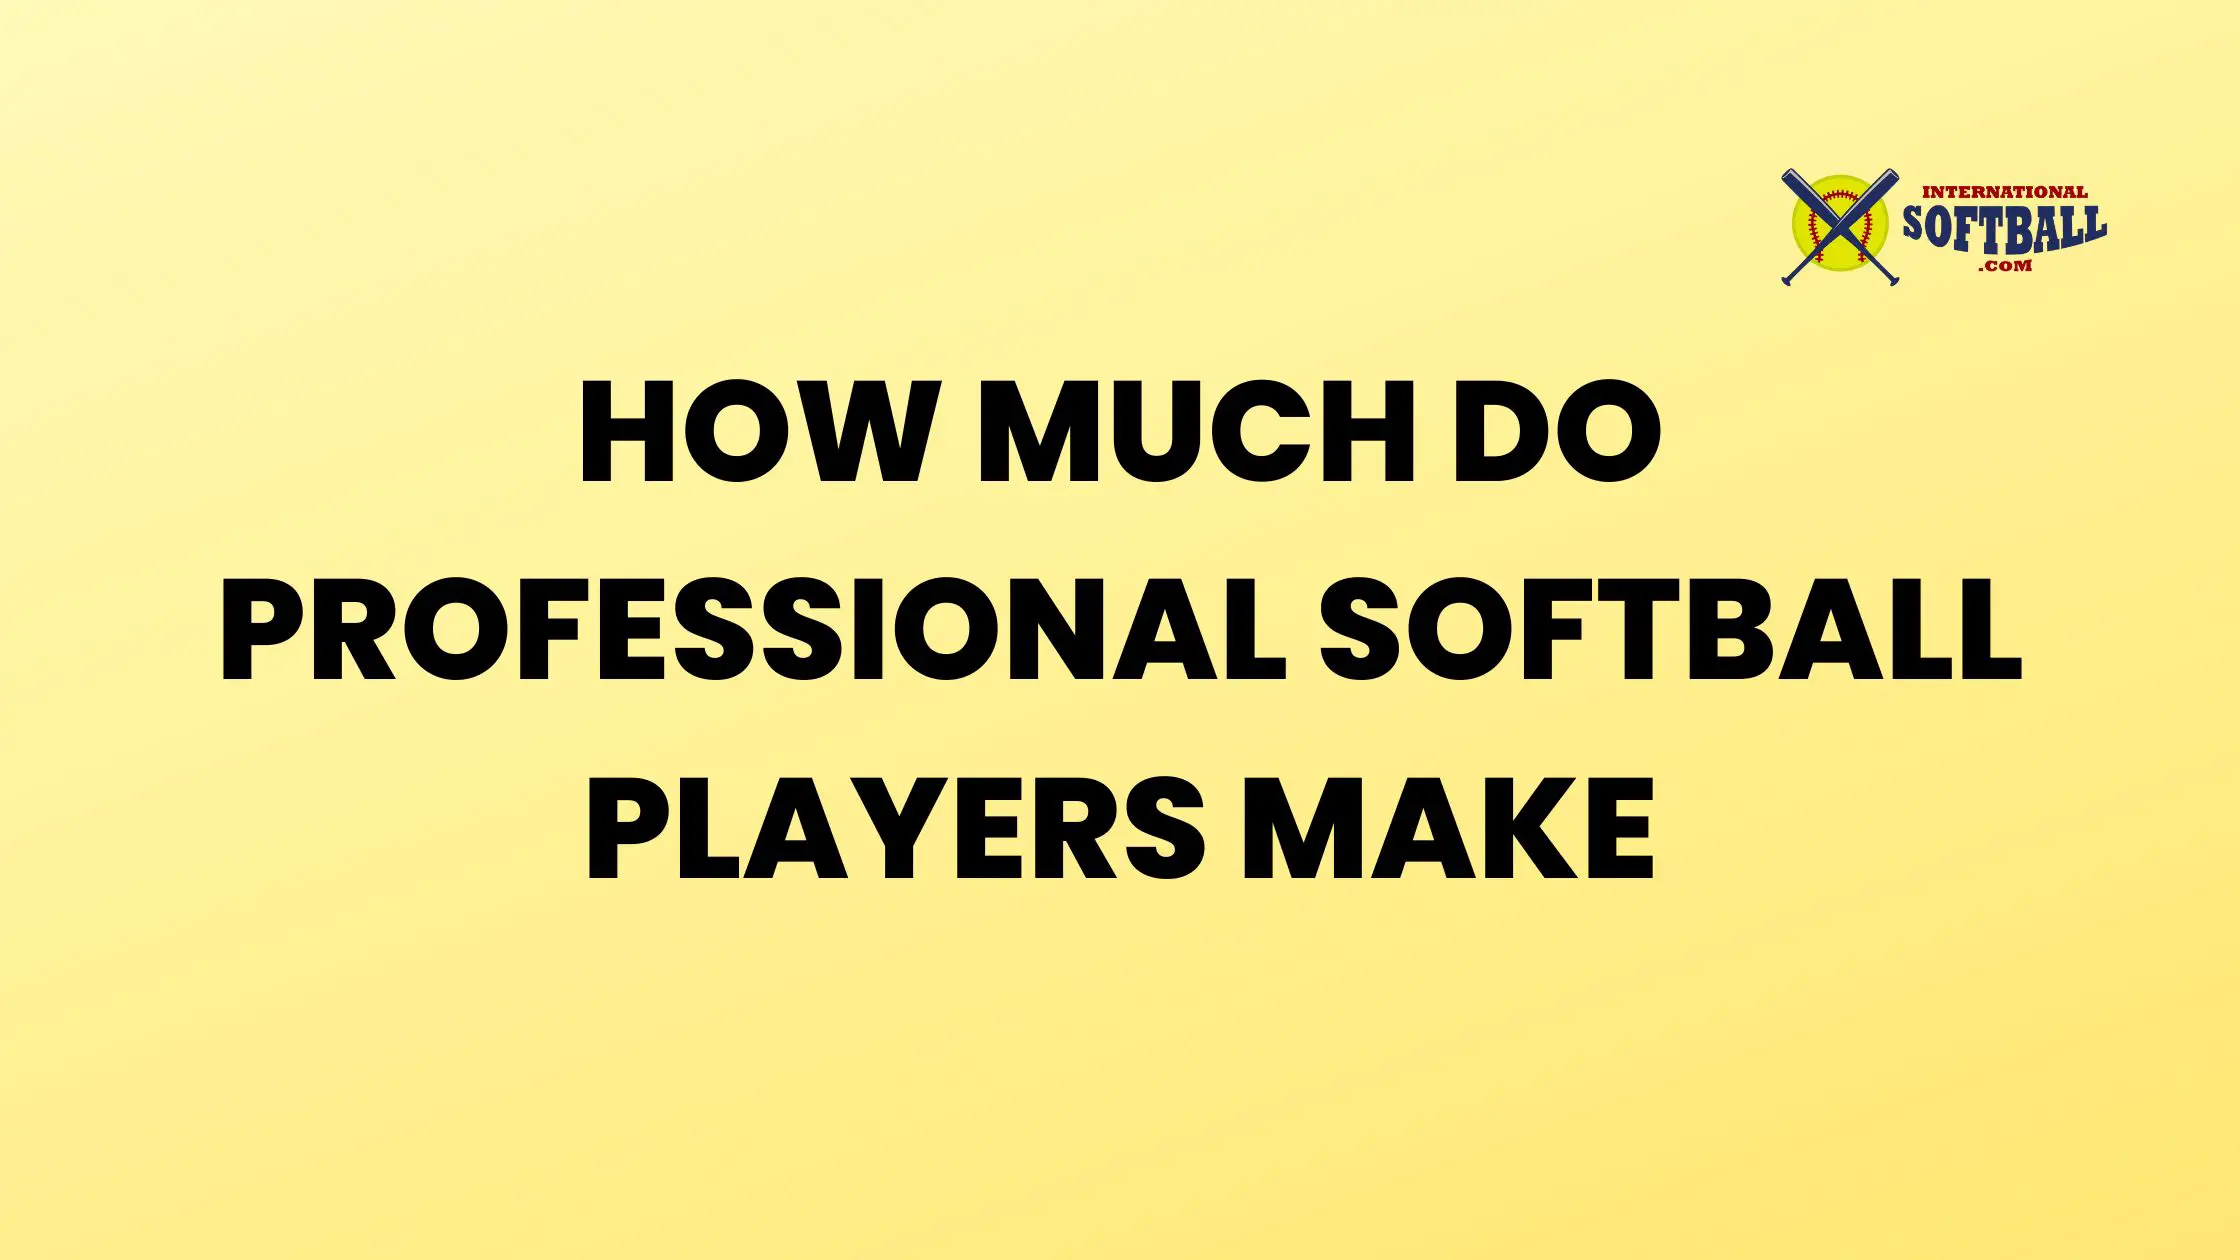 HOW MUCH DO PROFESSIONAL SOFTBALL PLAYERS MAKE